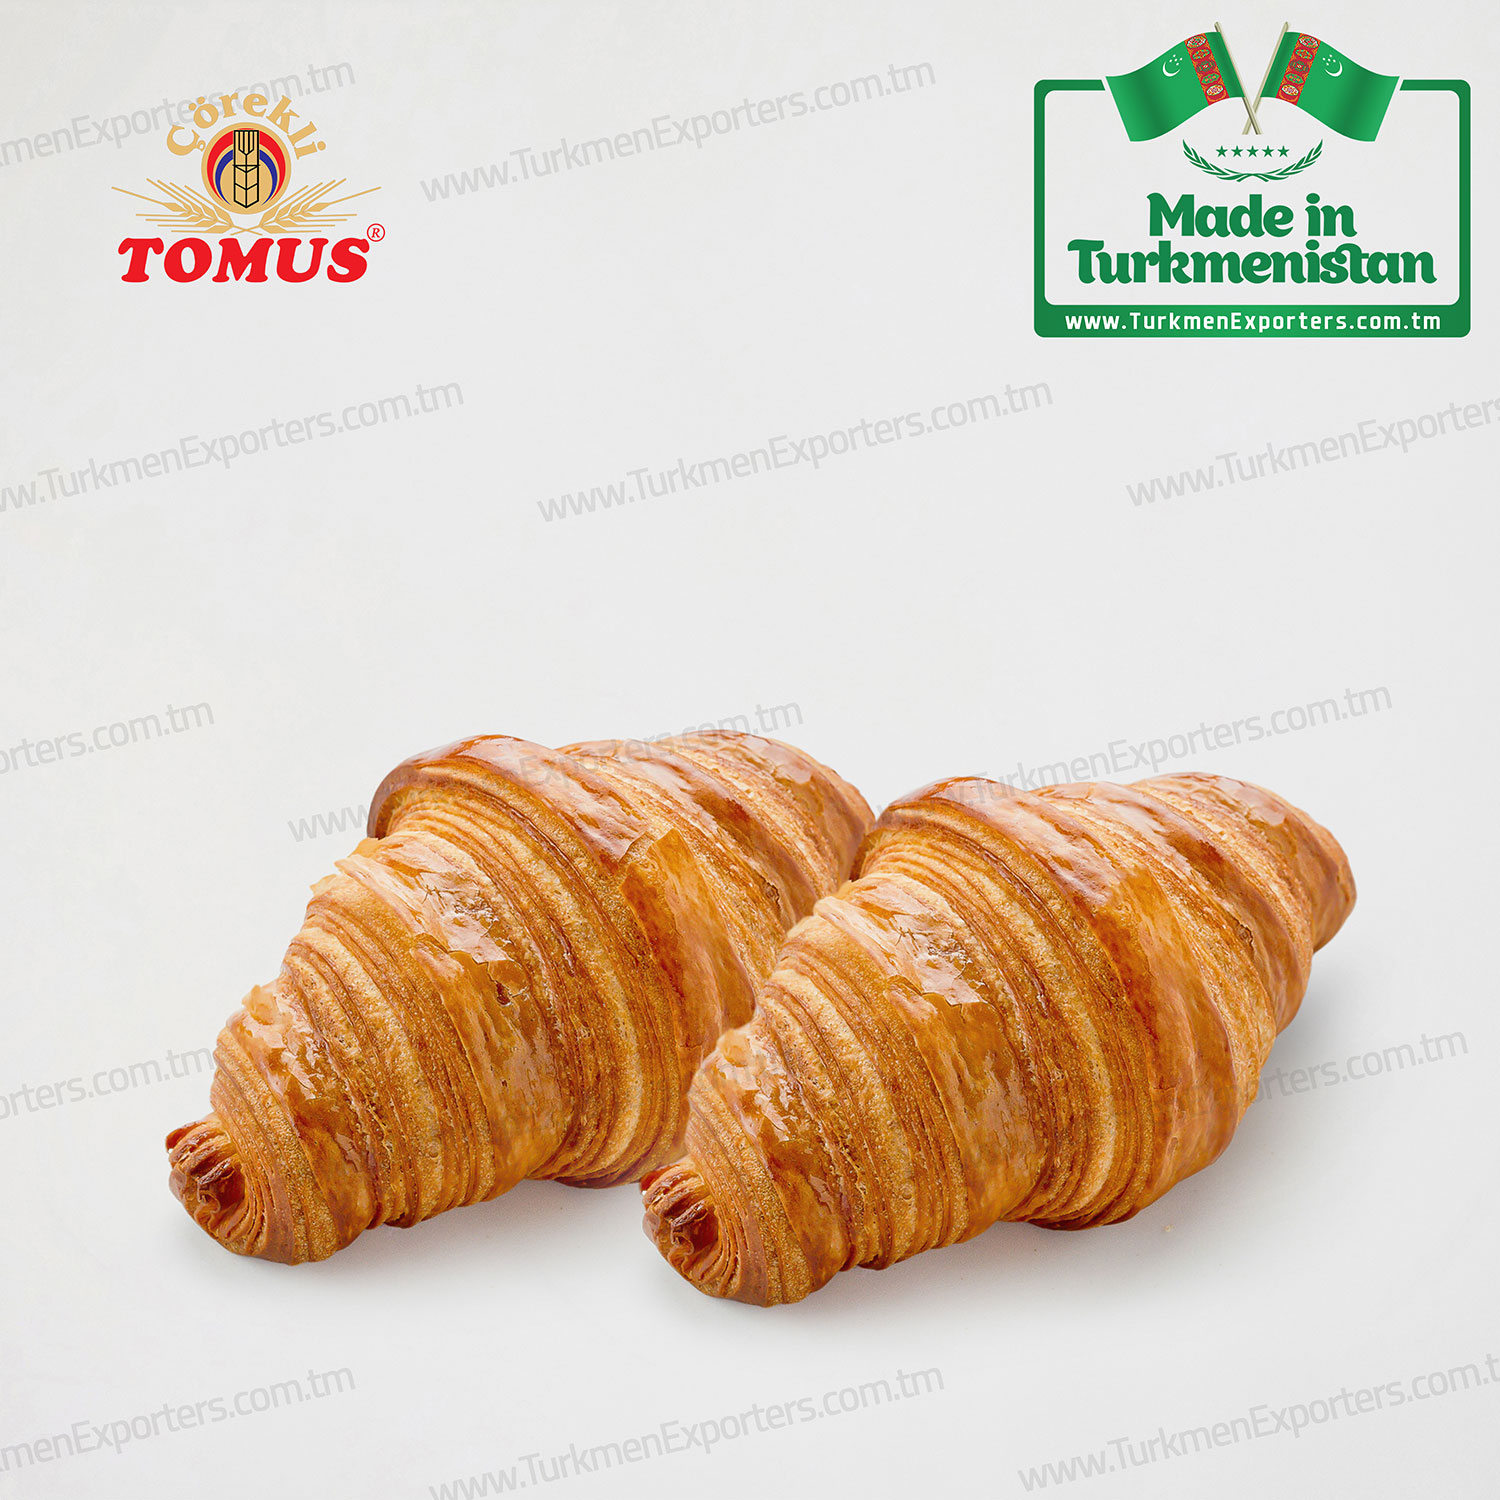 Croissants wholesale from Turkmenistan | Tomus bakery factory 